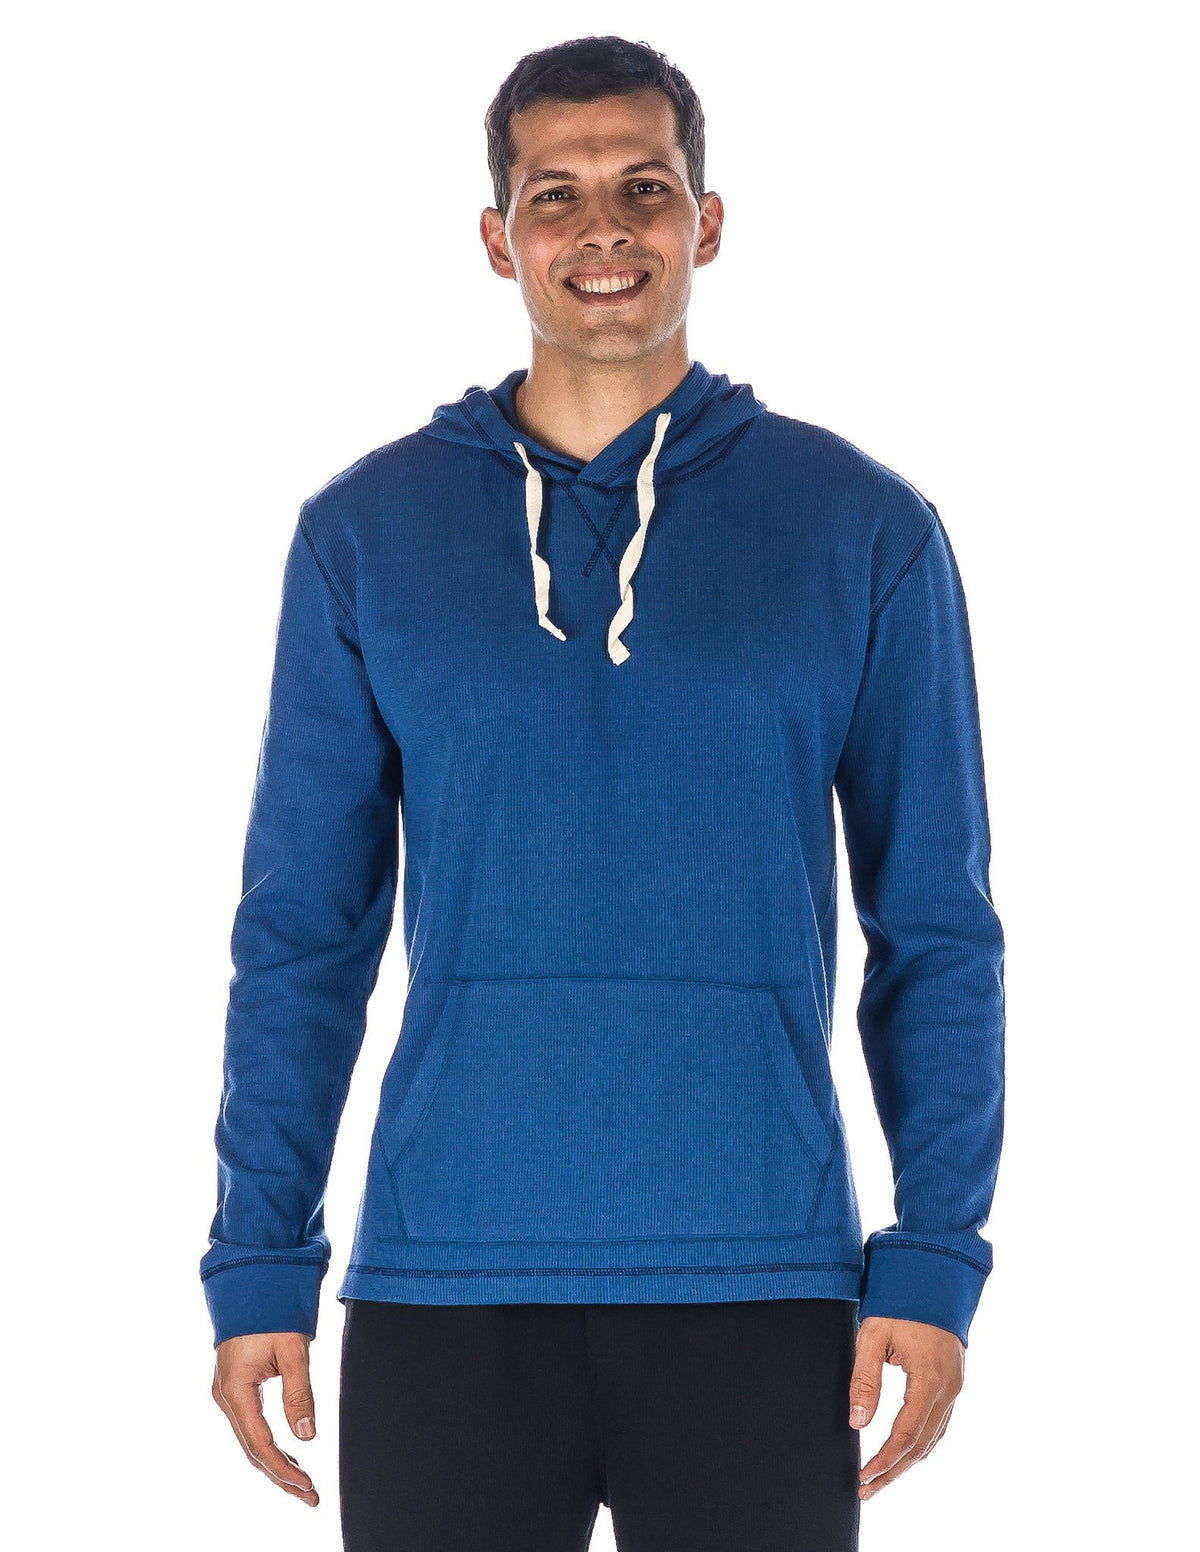 Men's Solid Thermal Lounge Hoodie - with Contrast Stitching - Navy